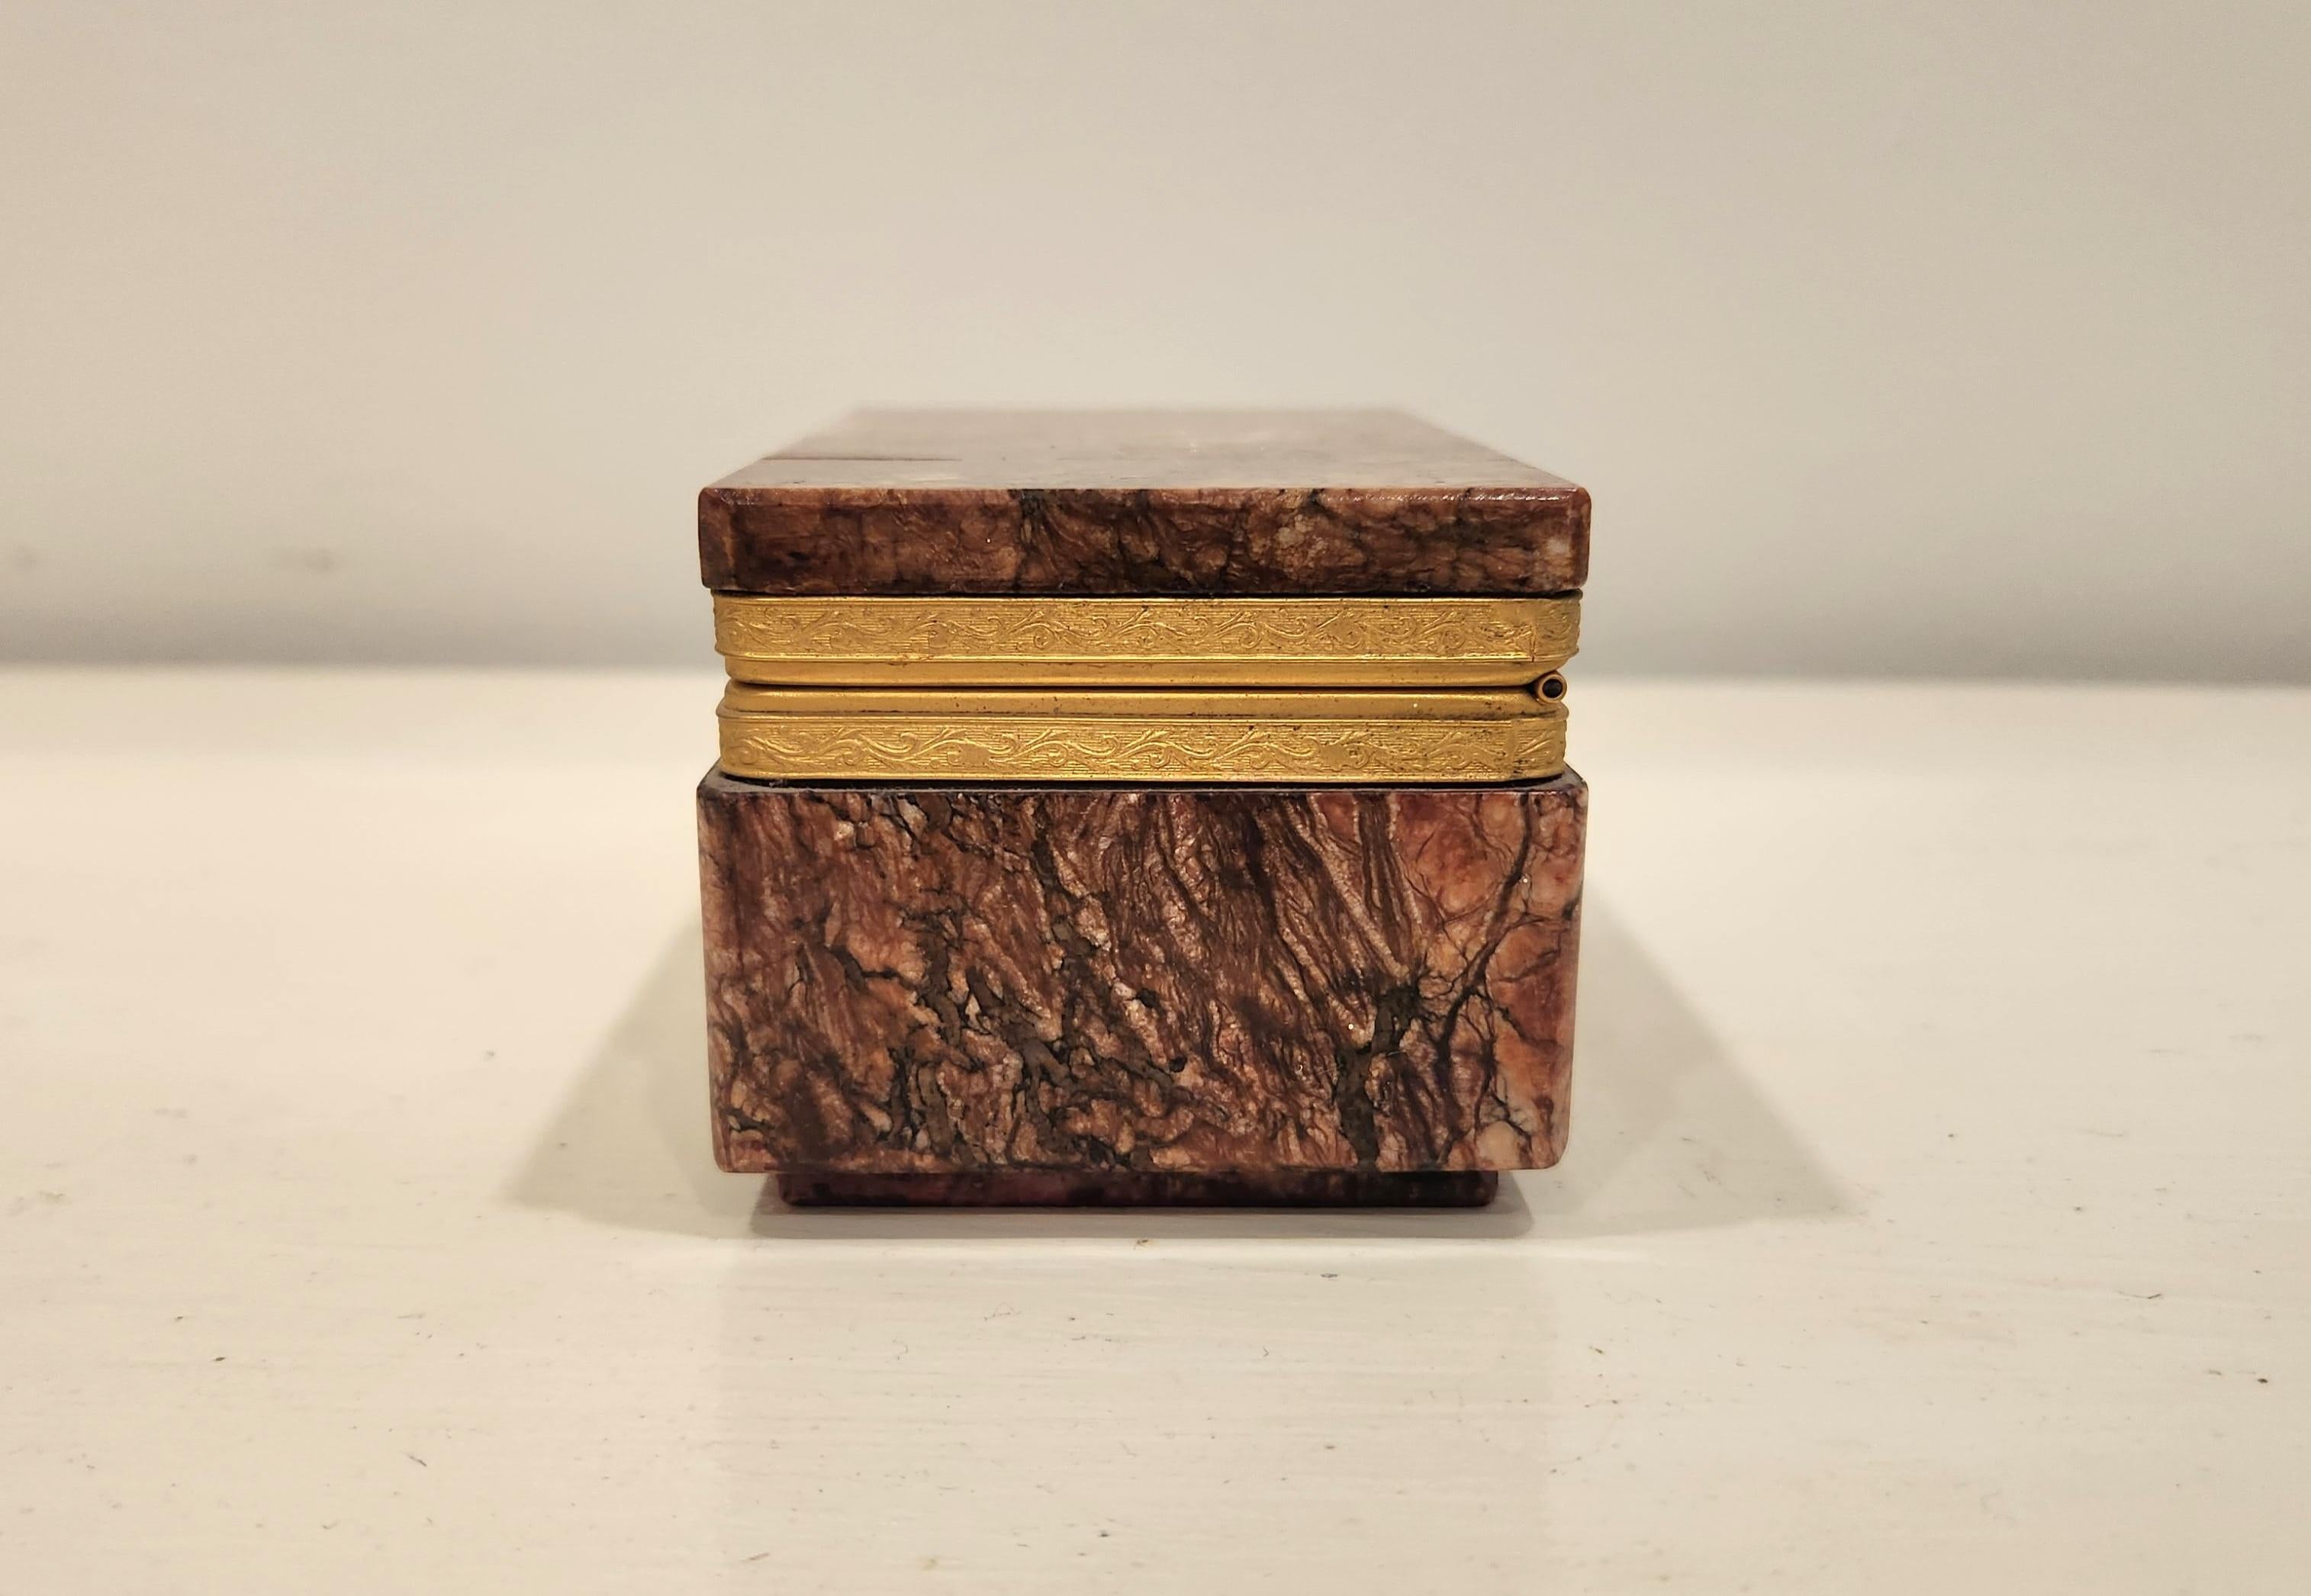 This elegant Italian box from the 1960's has a wonderful range of color seen in the marble, giving it depth and texture. The colors include light rose, coral, and pink with streaks of deep brown and  terracotta adding richness and interest to the